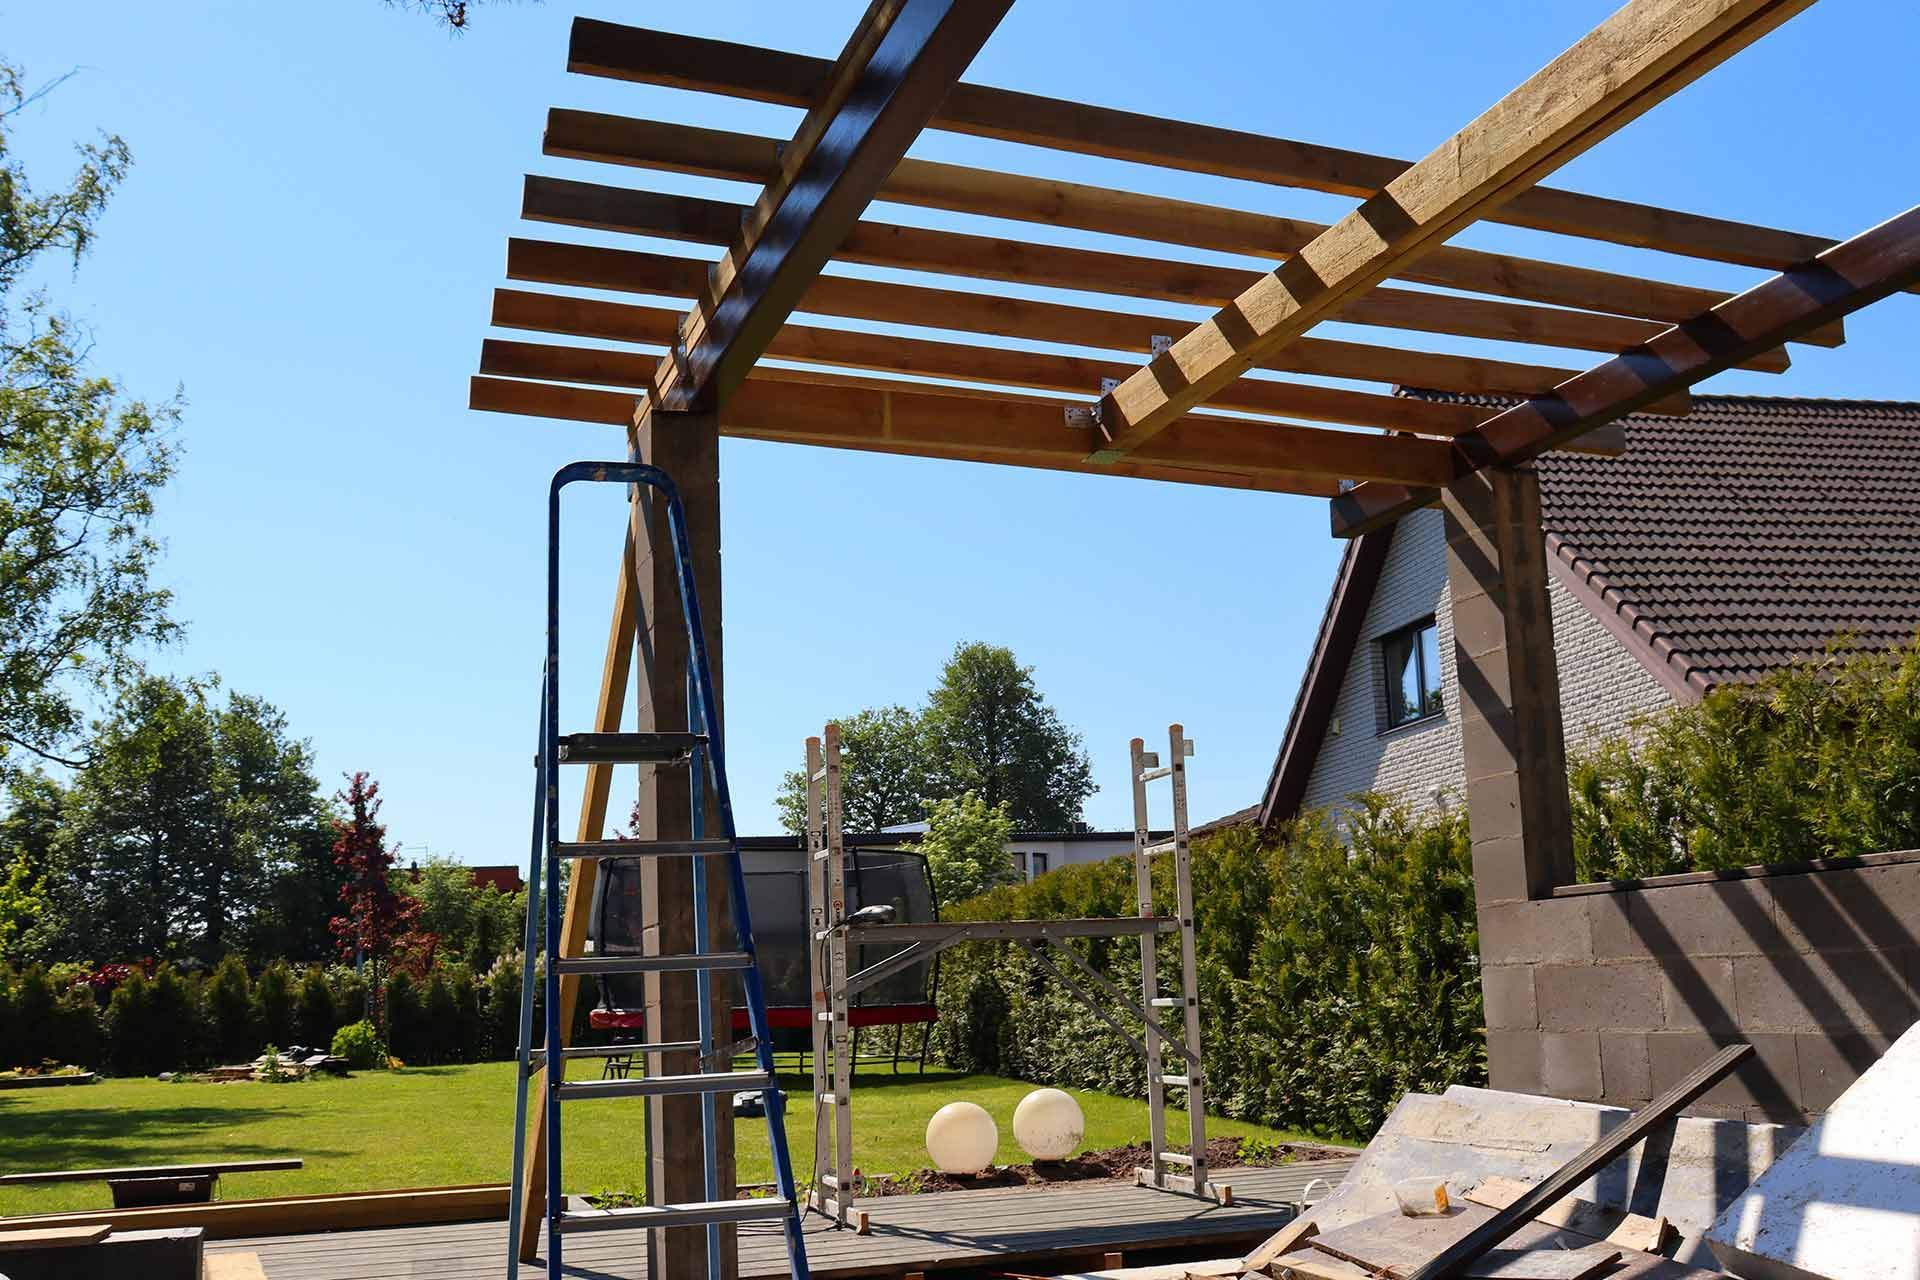 Benefits of installing a pergola in your outdoor living space